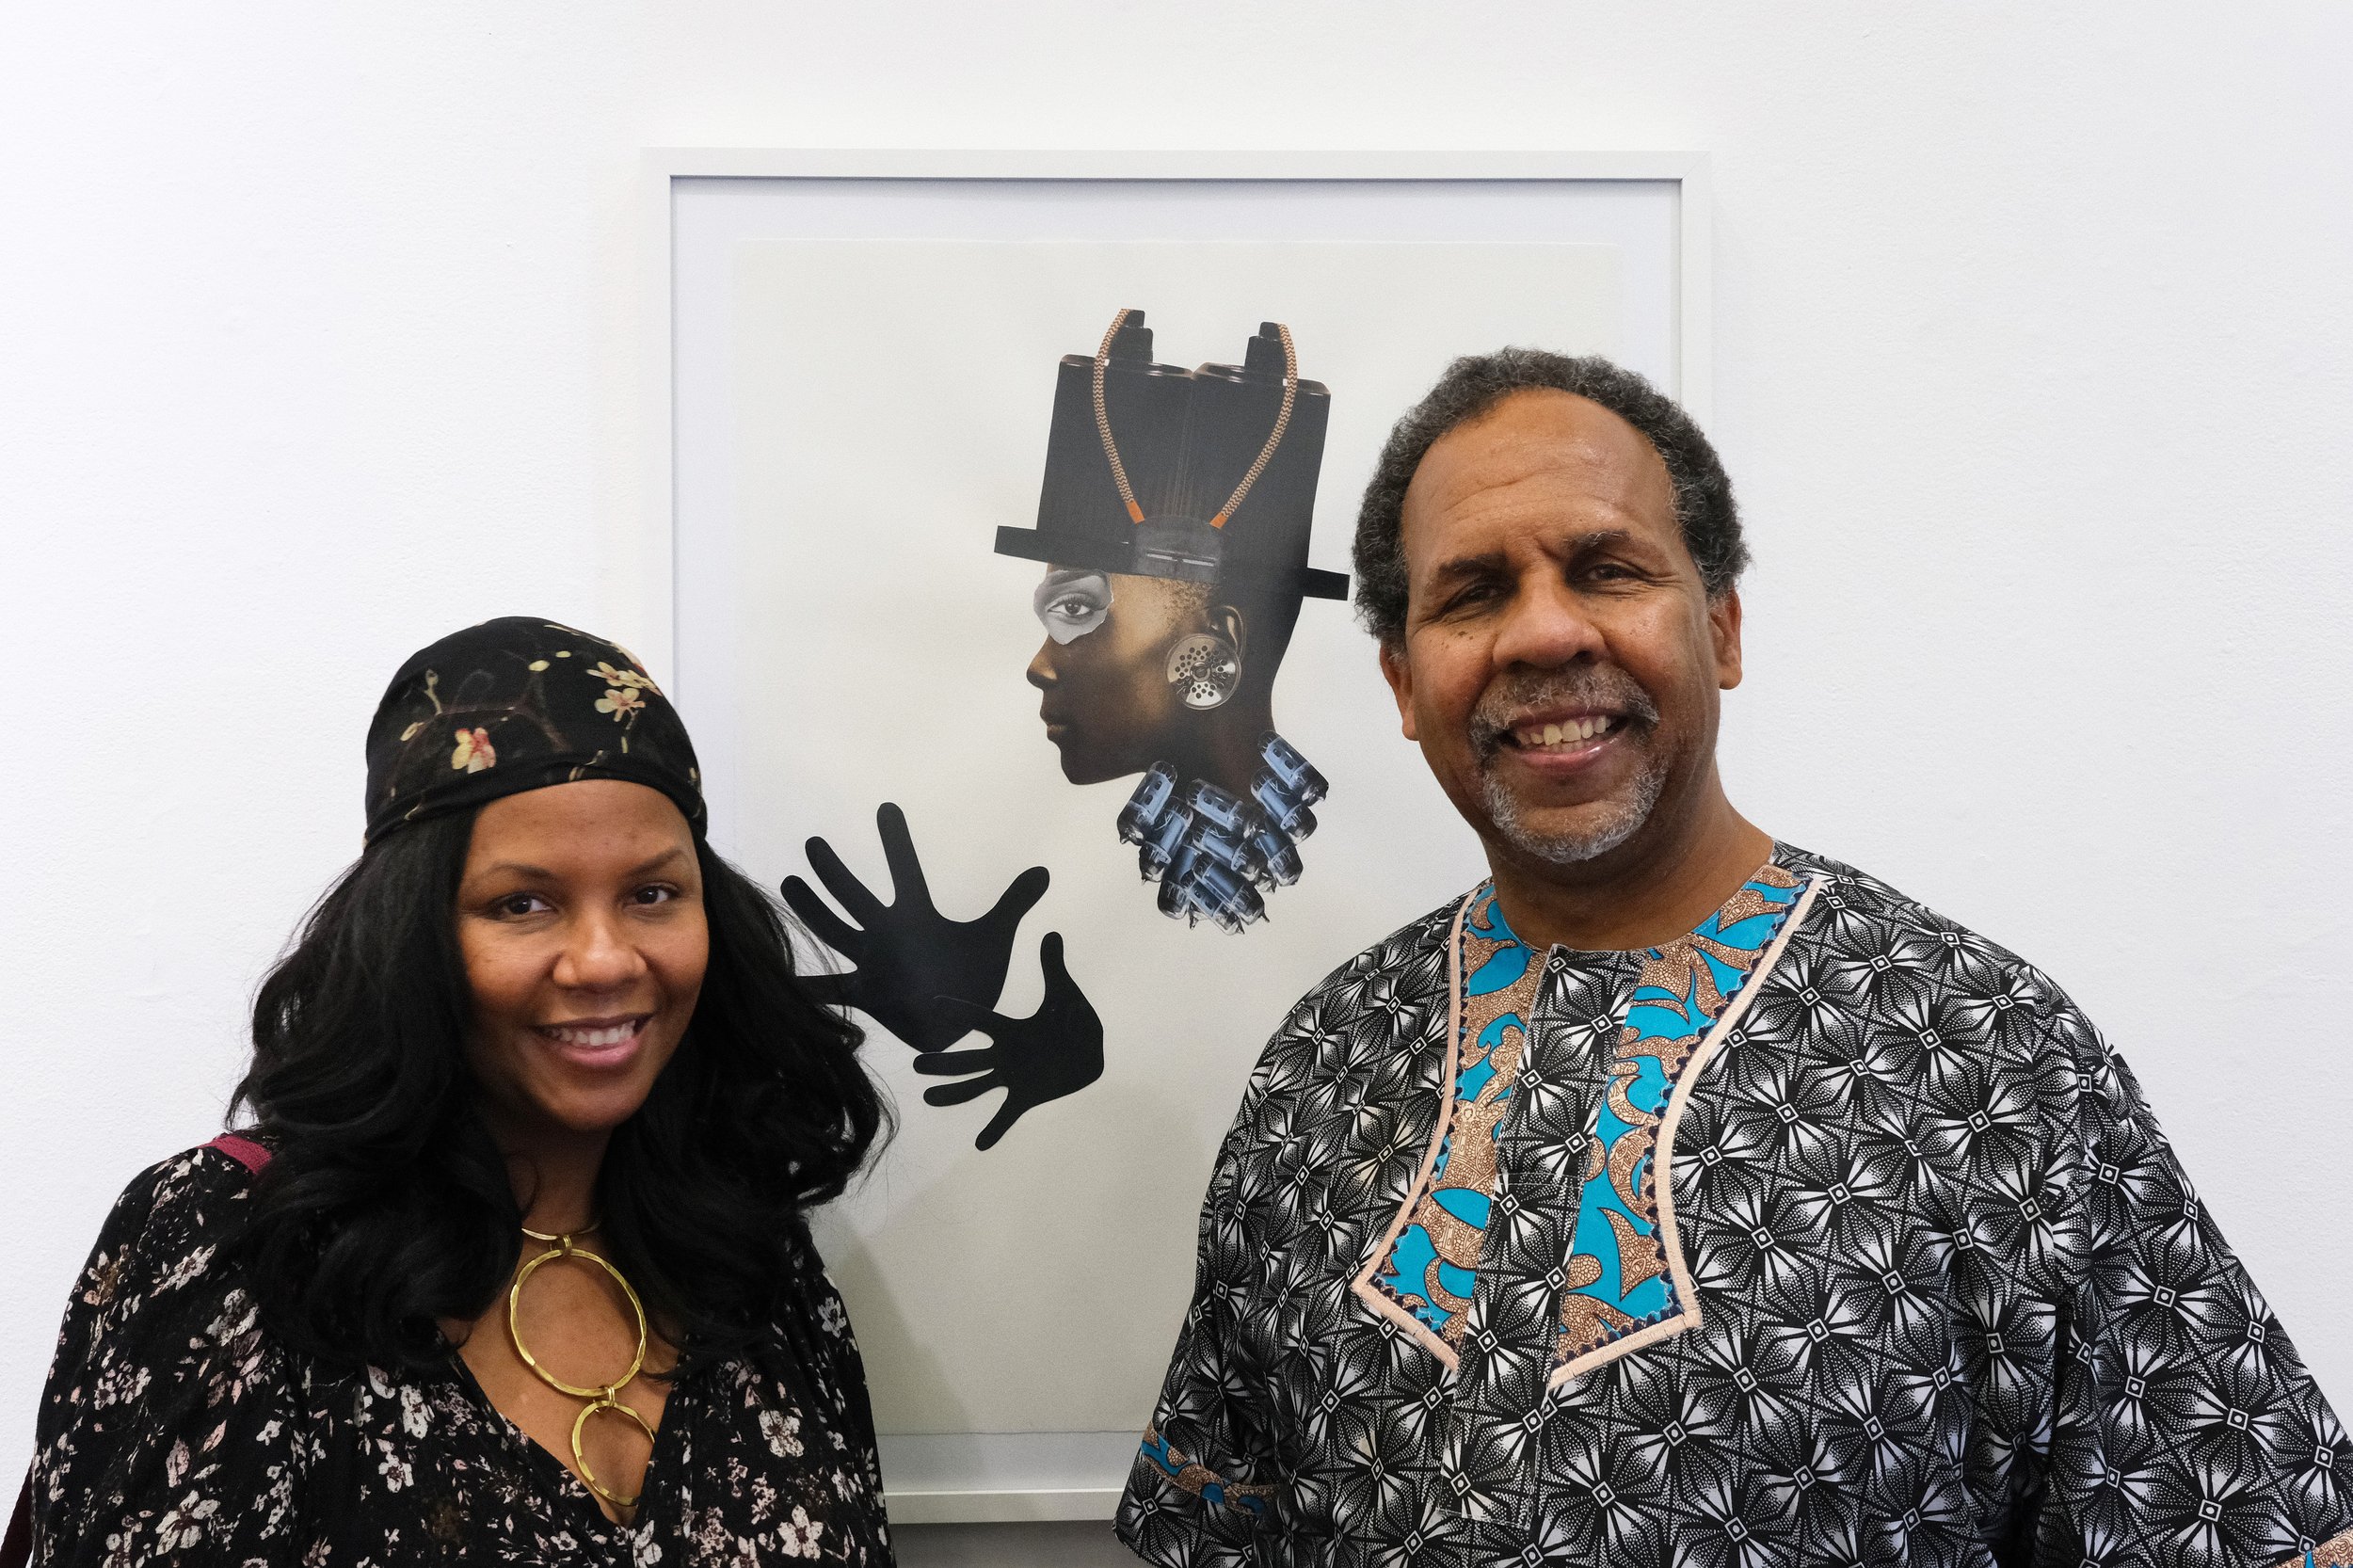  Melanie Buster (left) invited her father Charles Buster (right) to attend the Black History-Themed Art Walk at the Building Bridgers Art Exchange Gallery, in Santa Monica from an advertisement she came across on social media. They stand in front of 